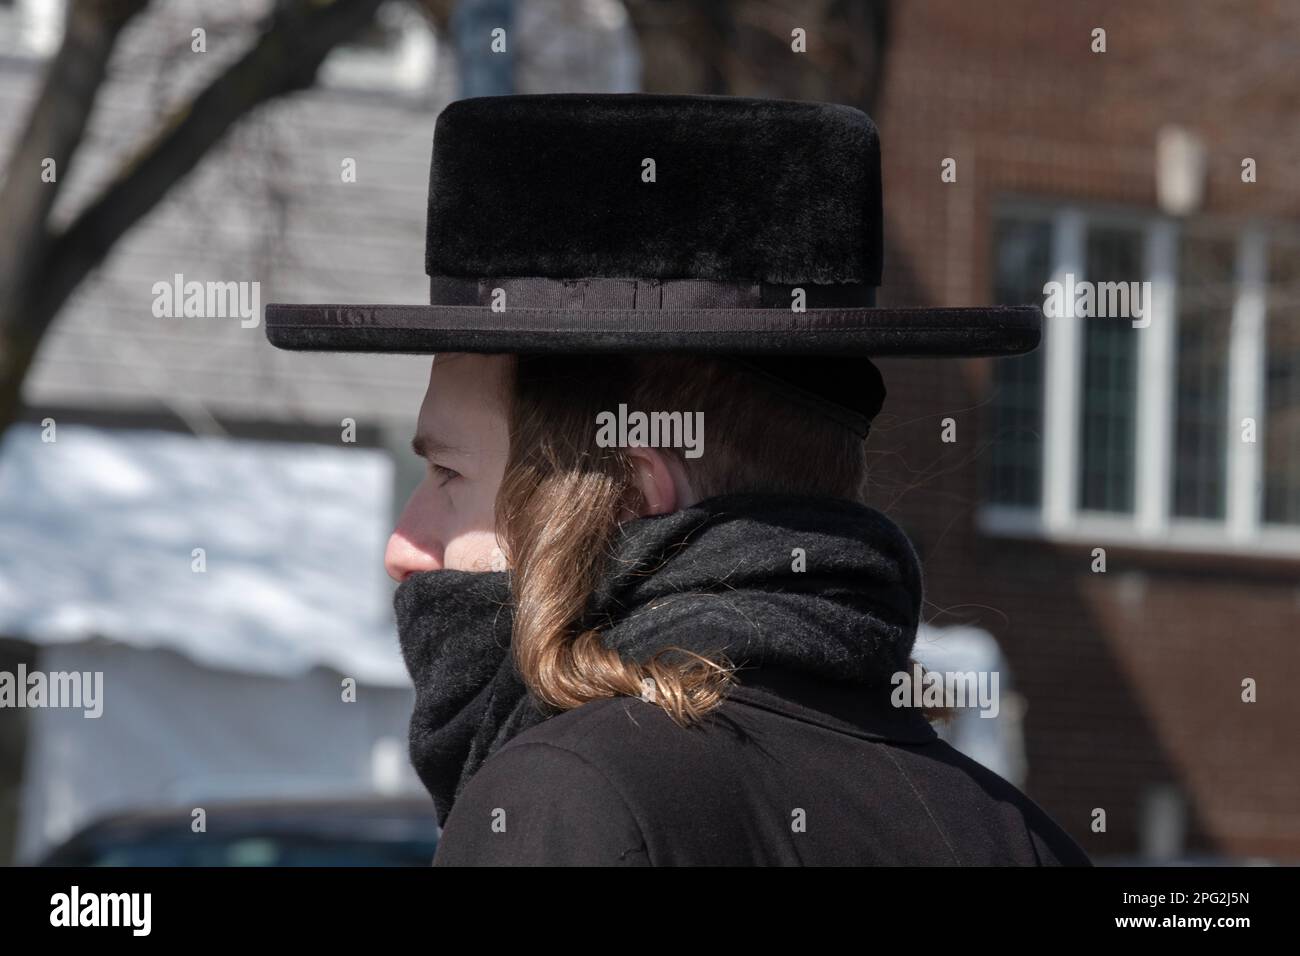 An orthodox Hasidic Jewish man with long curly peyot, a black hat and a scarf covering his mouth. In Brooklyn, New York on a cold winter day Stock Photo